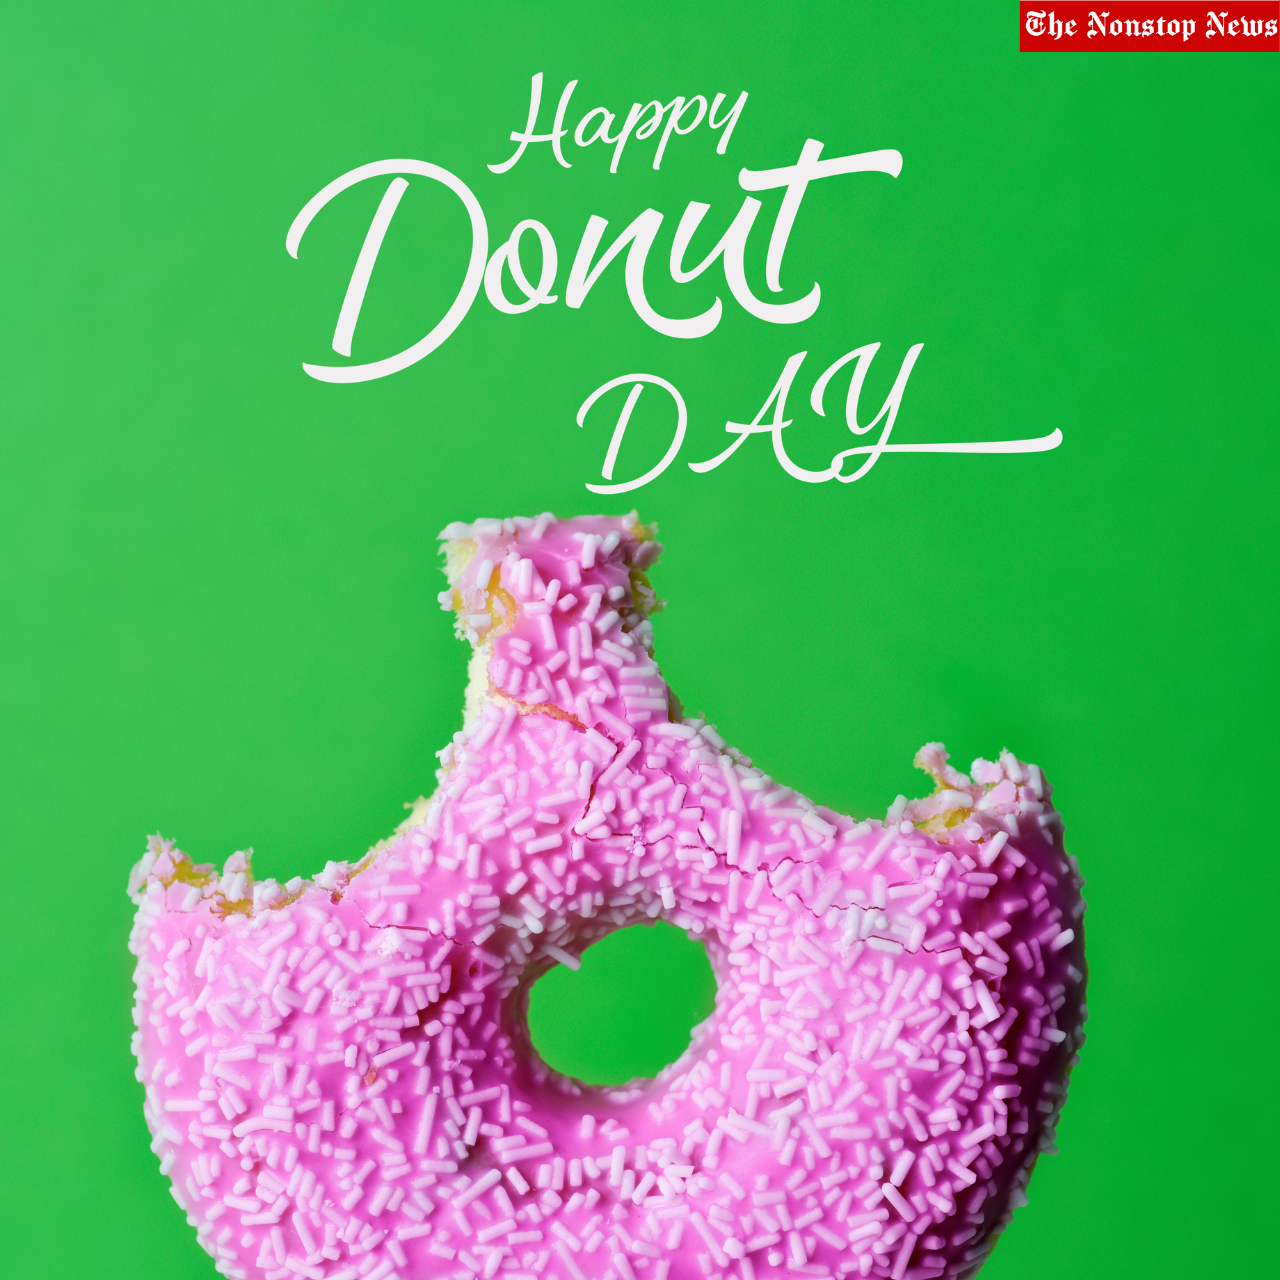 National Donut Day In The United States 2023 Wishes, Images, Posters, Banners, Greetings, Quotes, Slogans, Cliparts and Captions